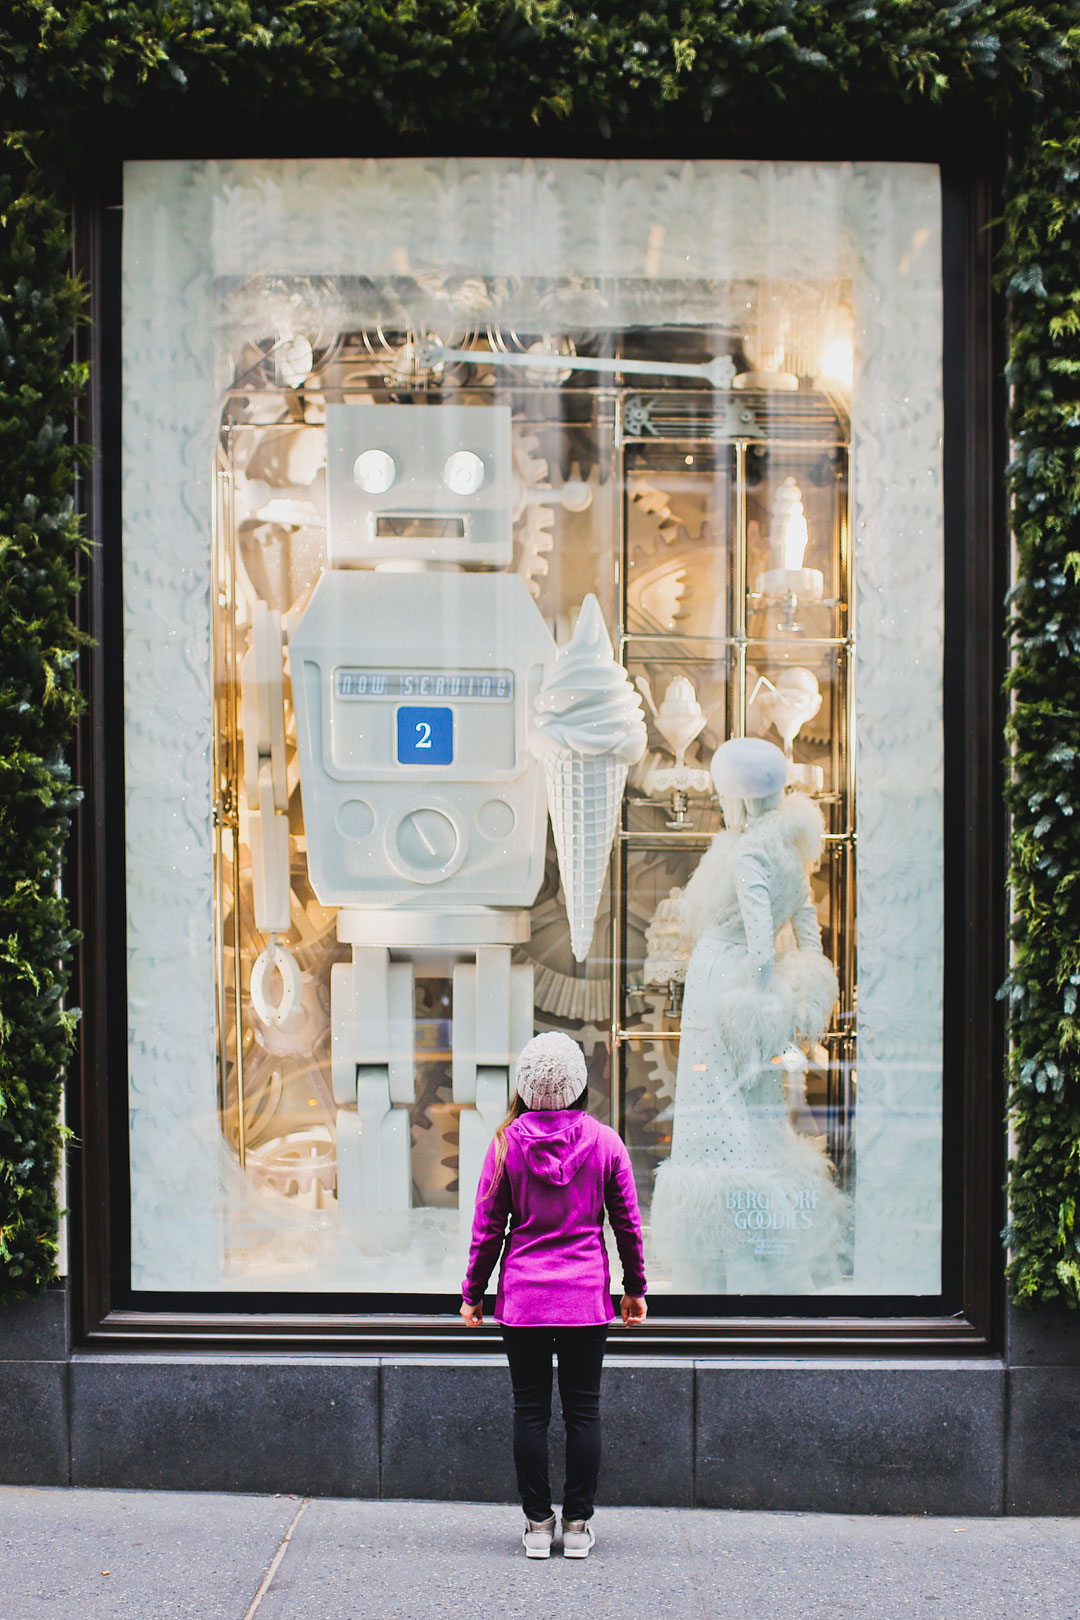 Christmas Shopping NYC - Holiday Windows on 5th Ave and Xmas in New York | LocalAdventurer.com